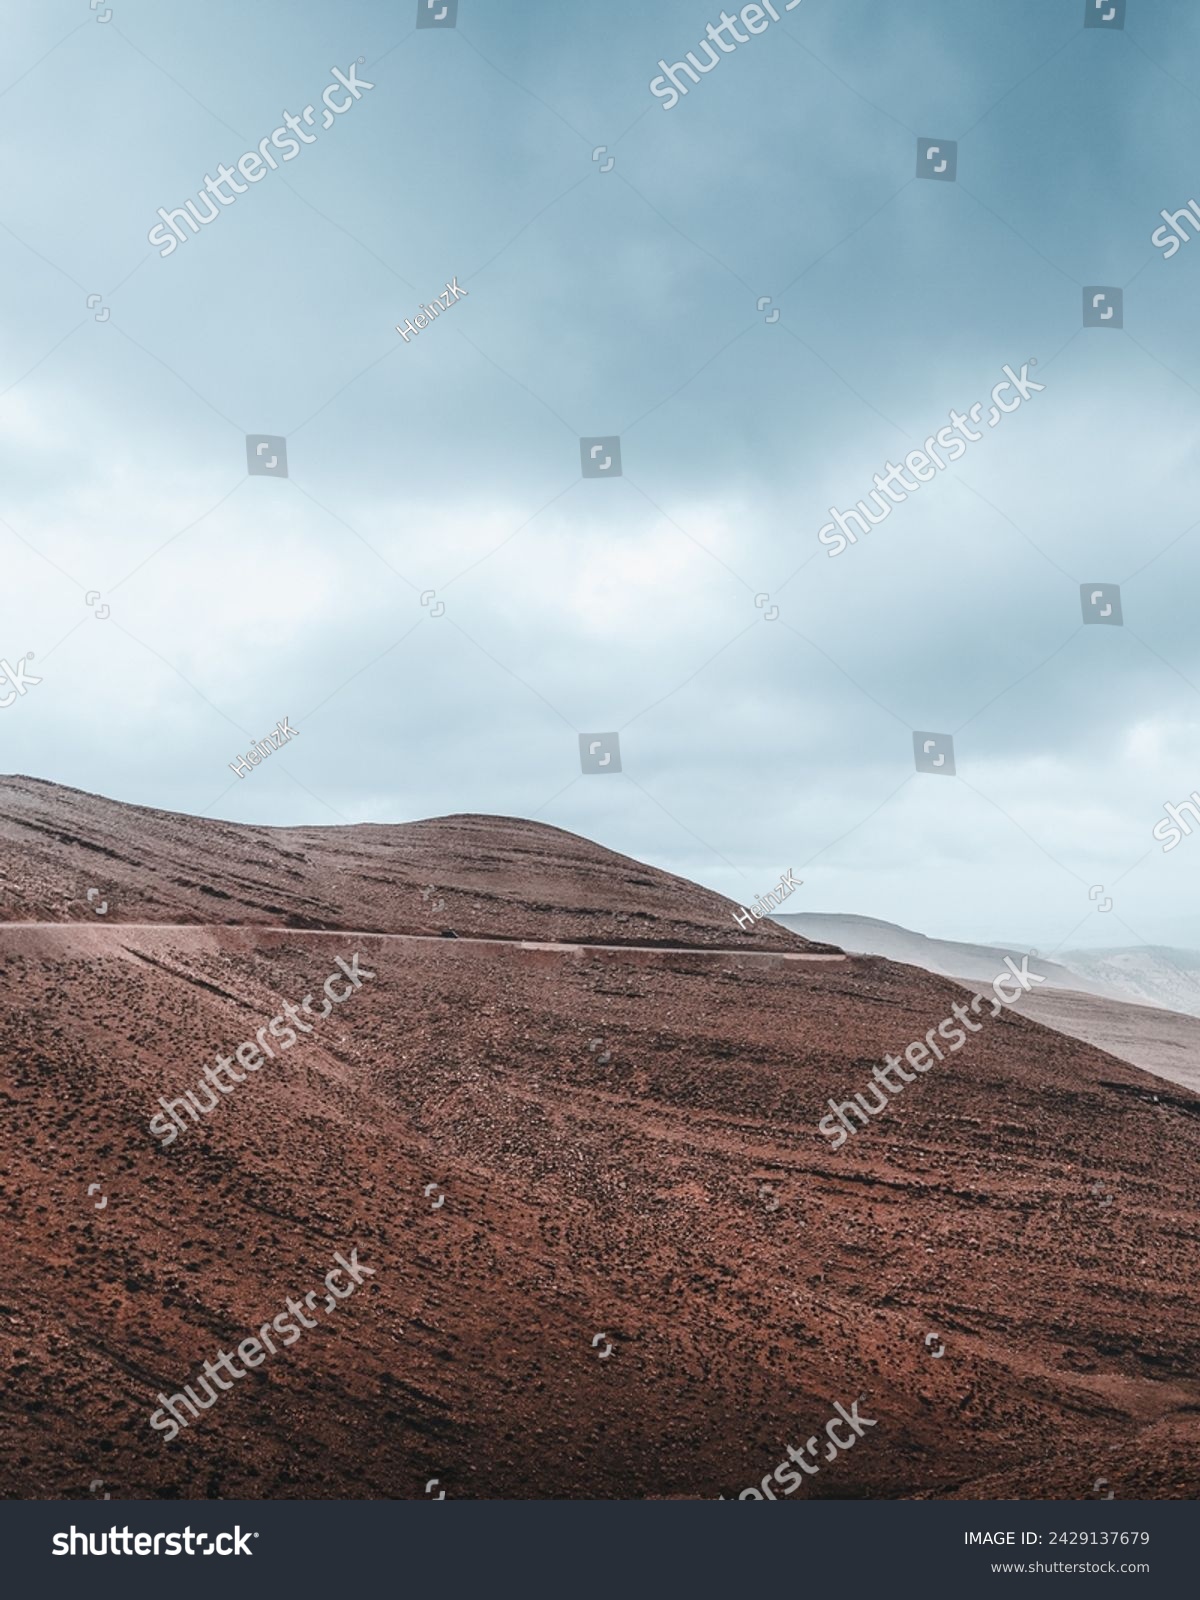 Layers of red and brown earth rise starkly against a dramatic sky, with a winding road cutting through the barren beauty of the Atlas Mountains. The raw, rugged terrain speaks of the earth's deep hist #2429137679